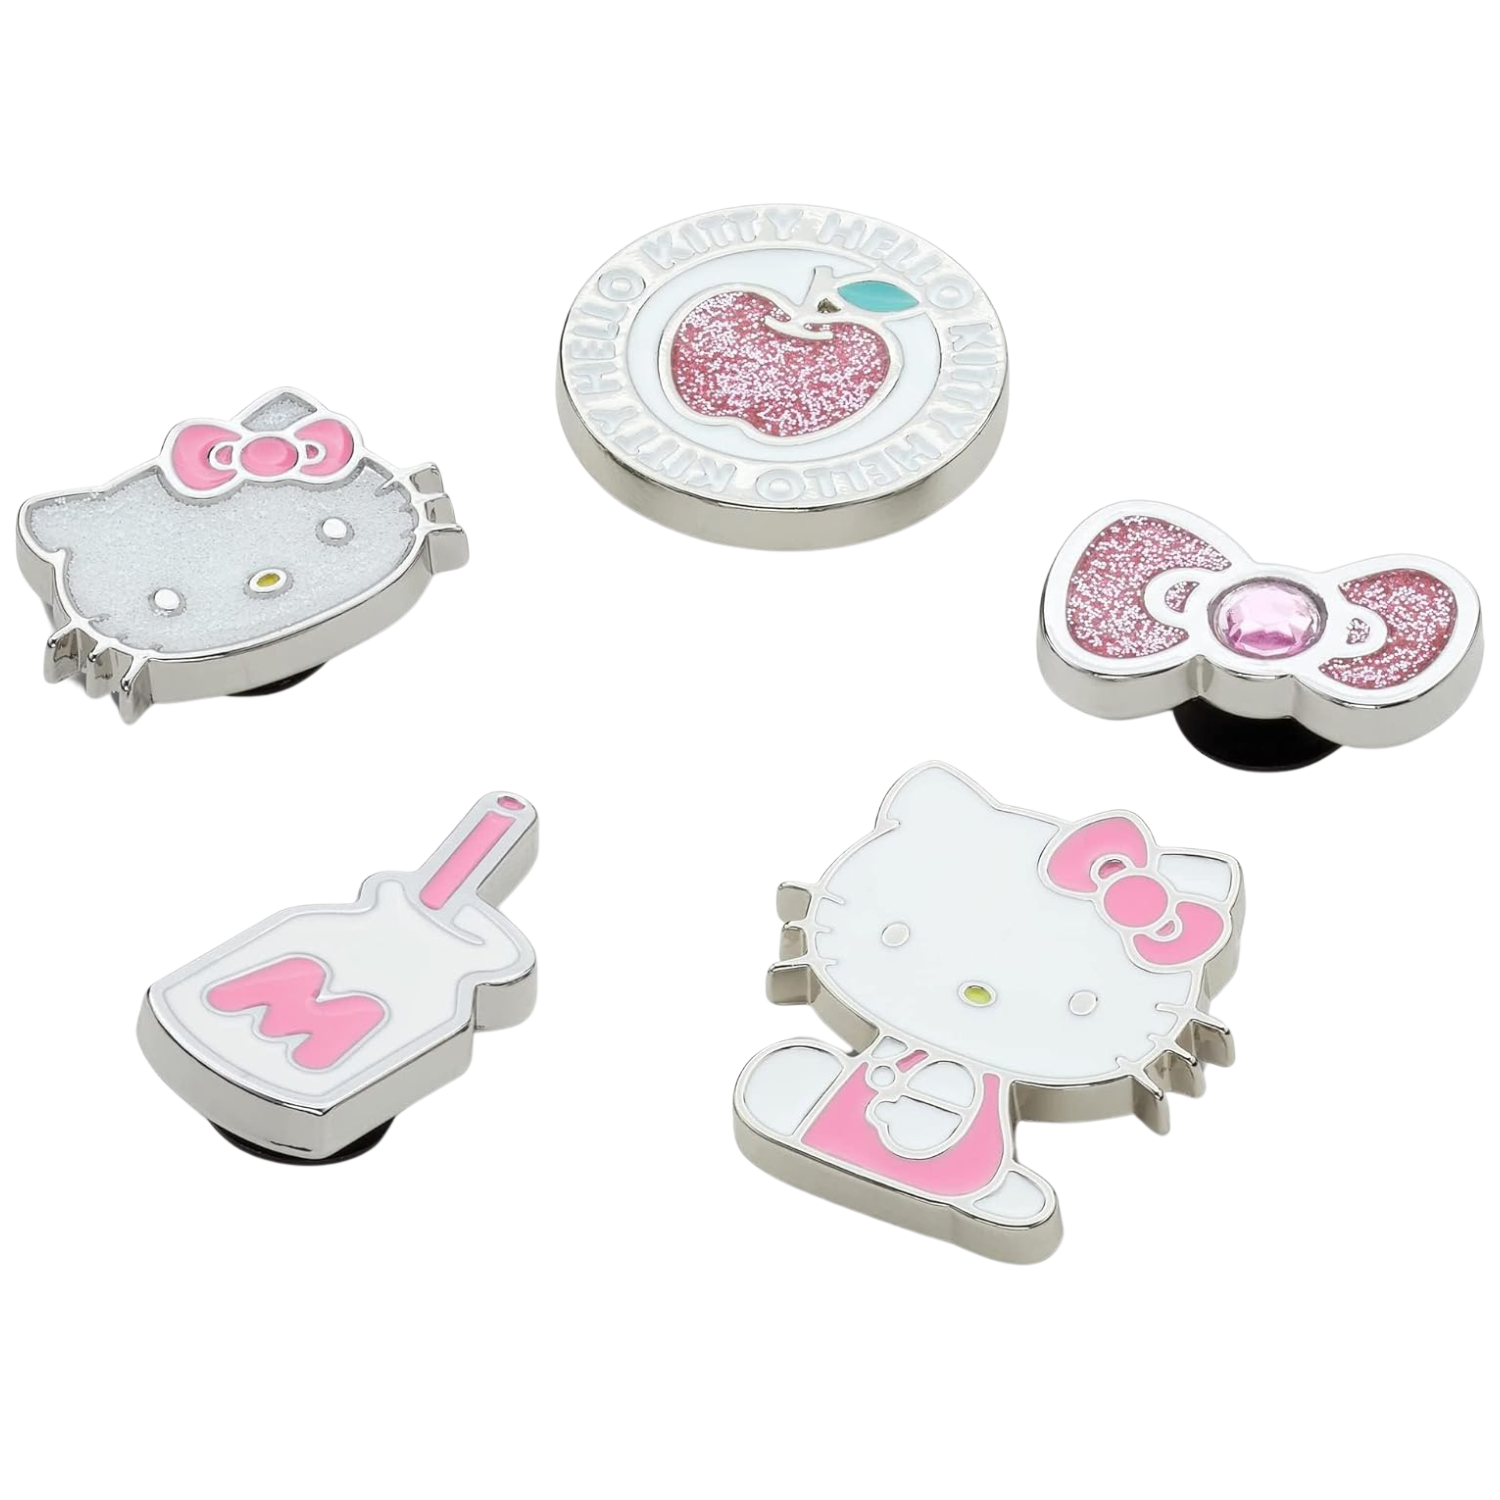 This image shows five glittery Hello Kitty shoe charms